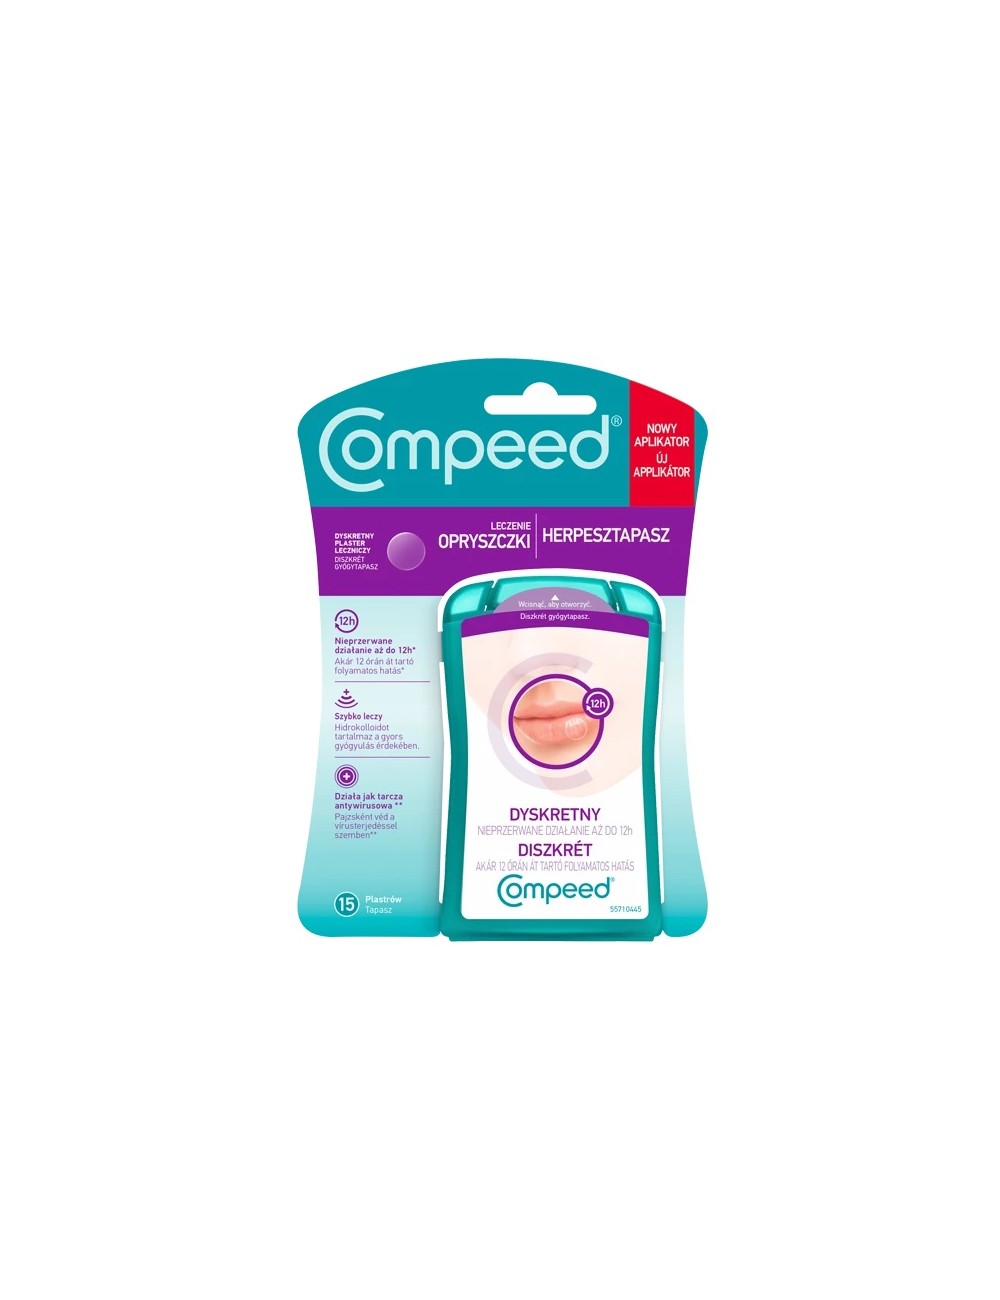 Compeed Invisible Cold Sore Patch 15 per pack, Up to 12 hours non-stop action from Day 1 - to heal fast.